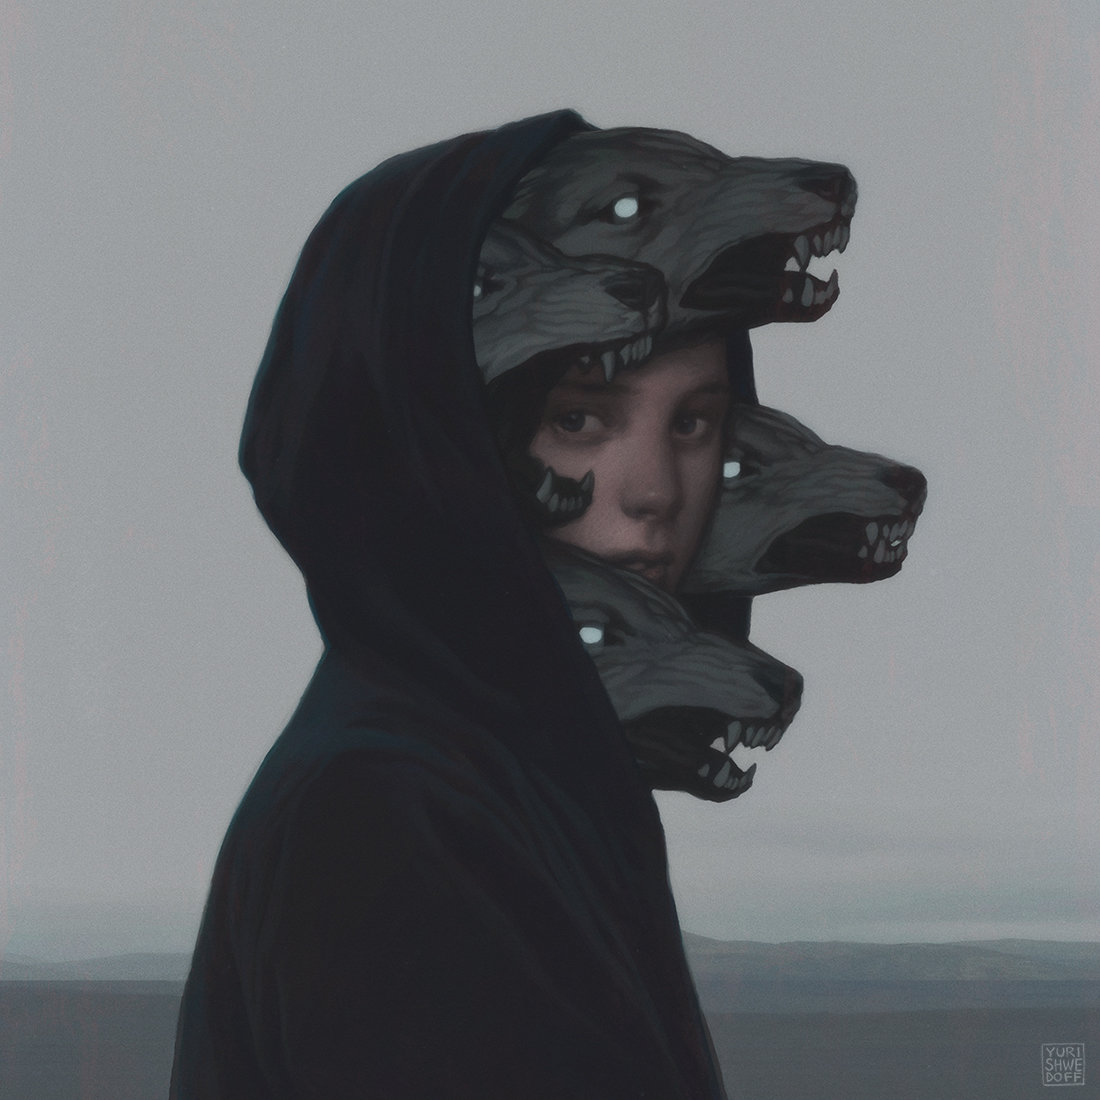 [Reflexion] Les oeuvres qui vous inspirent - Page 2 Yuri-shwedoff-wolf-pack-internet